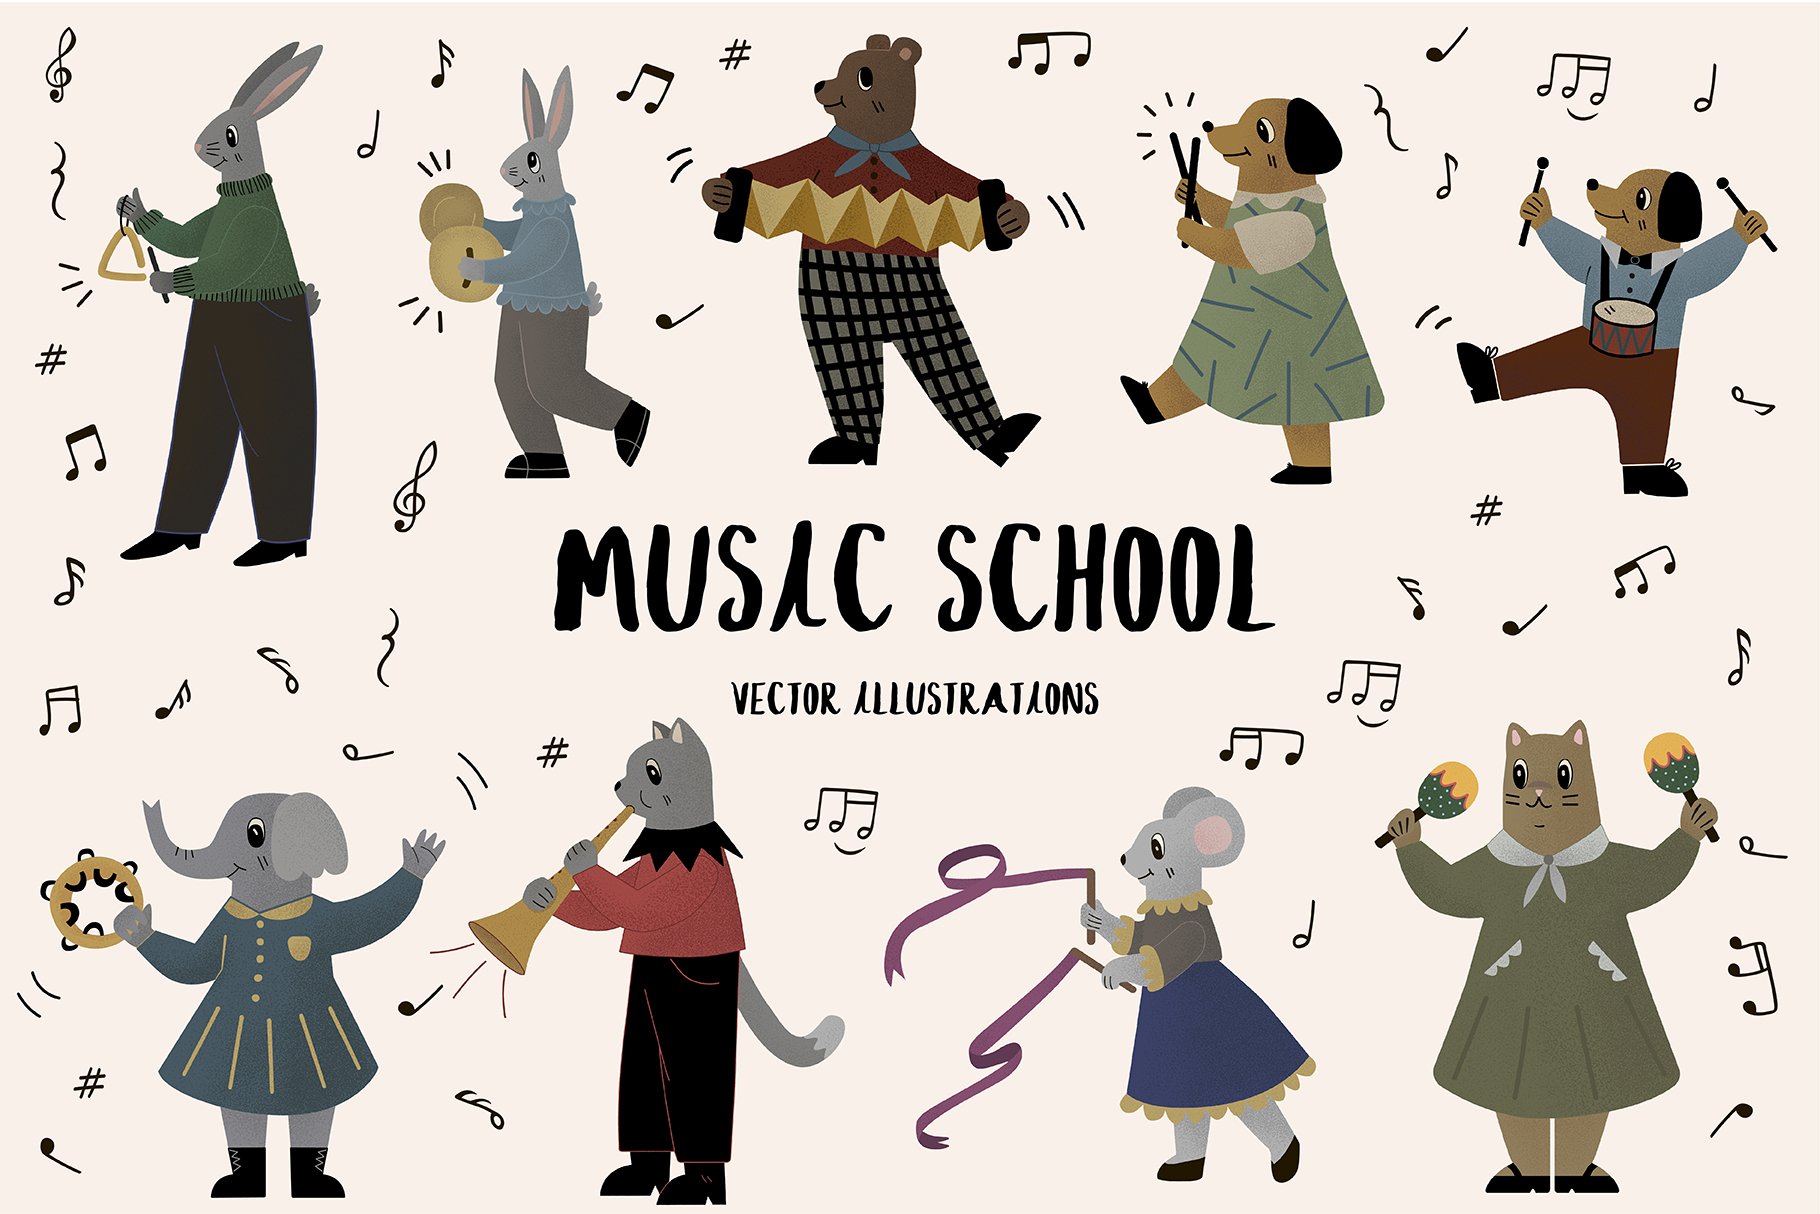 Music school cover image.